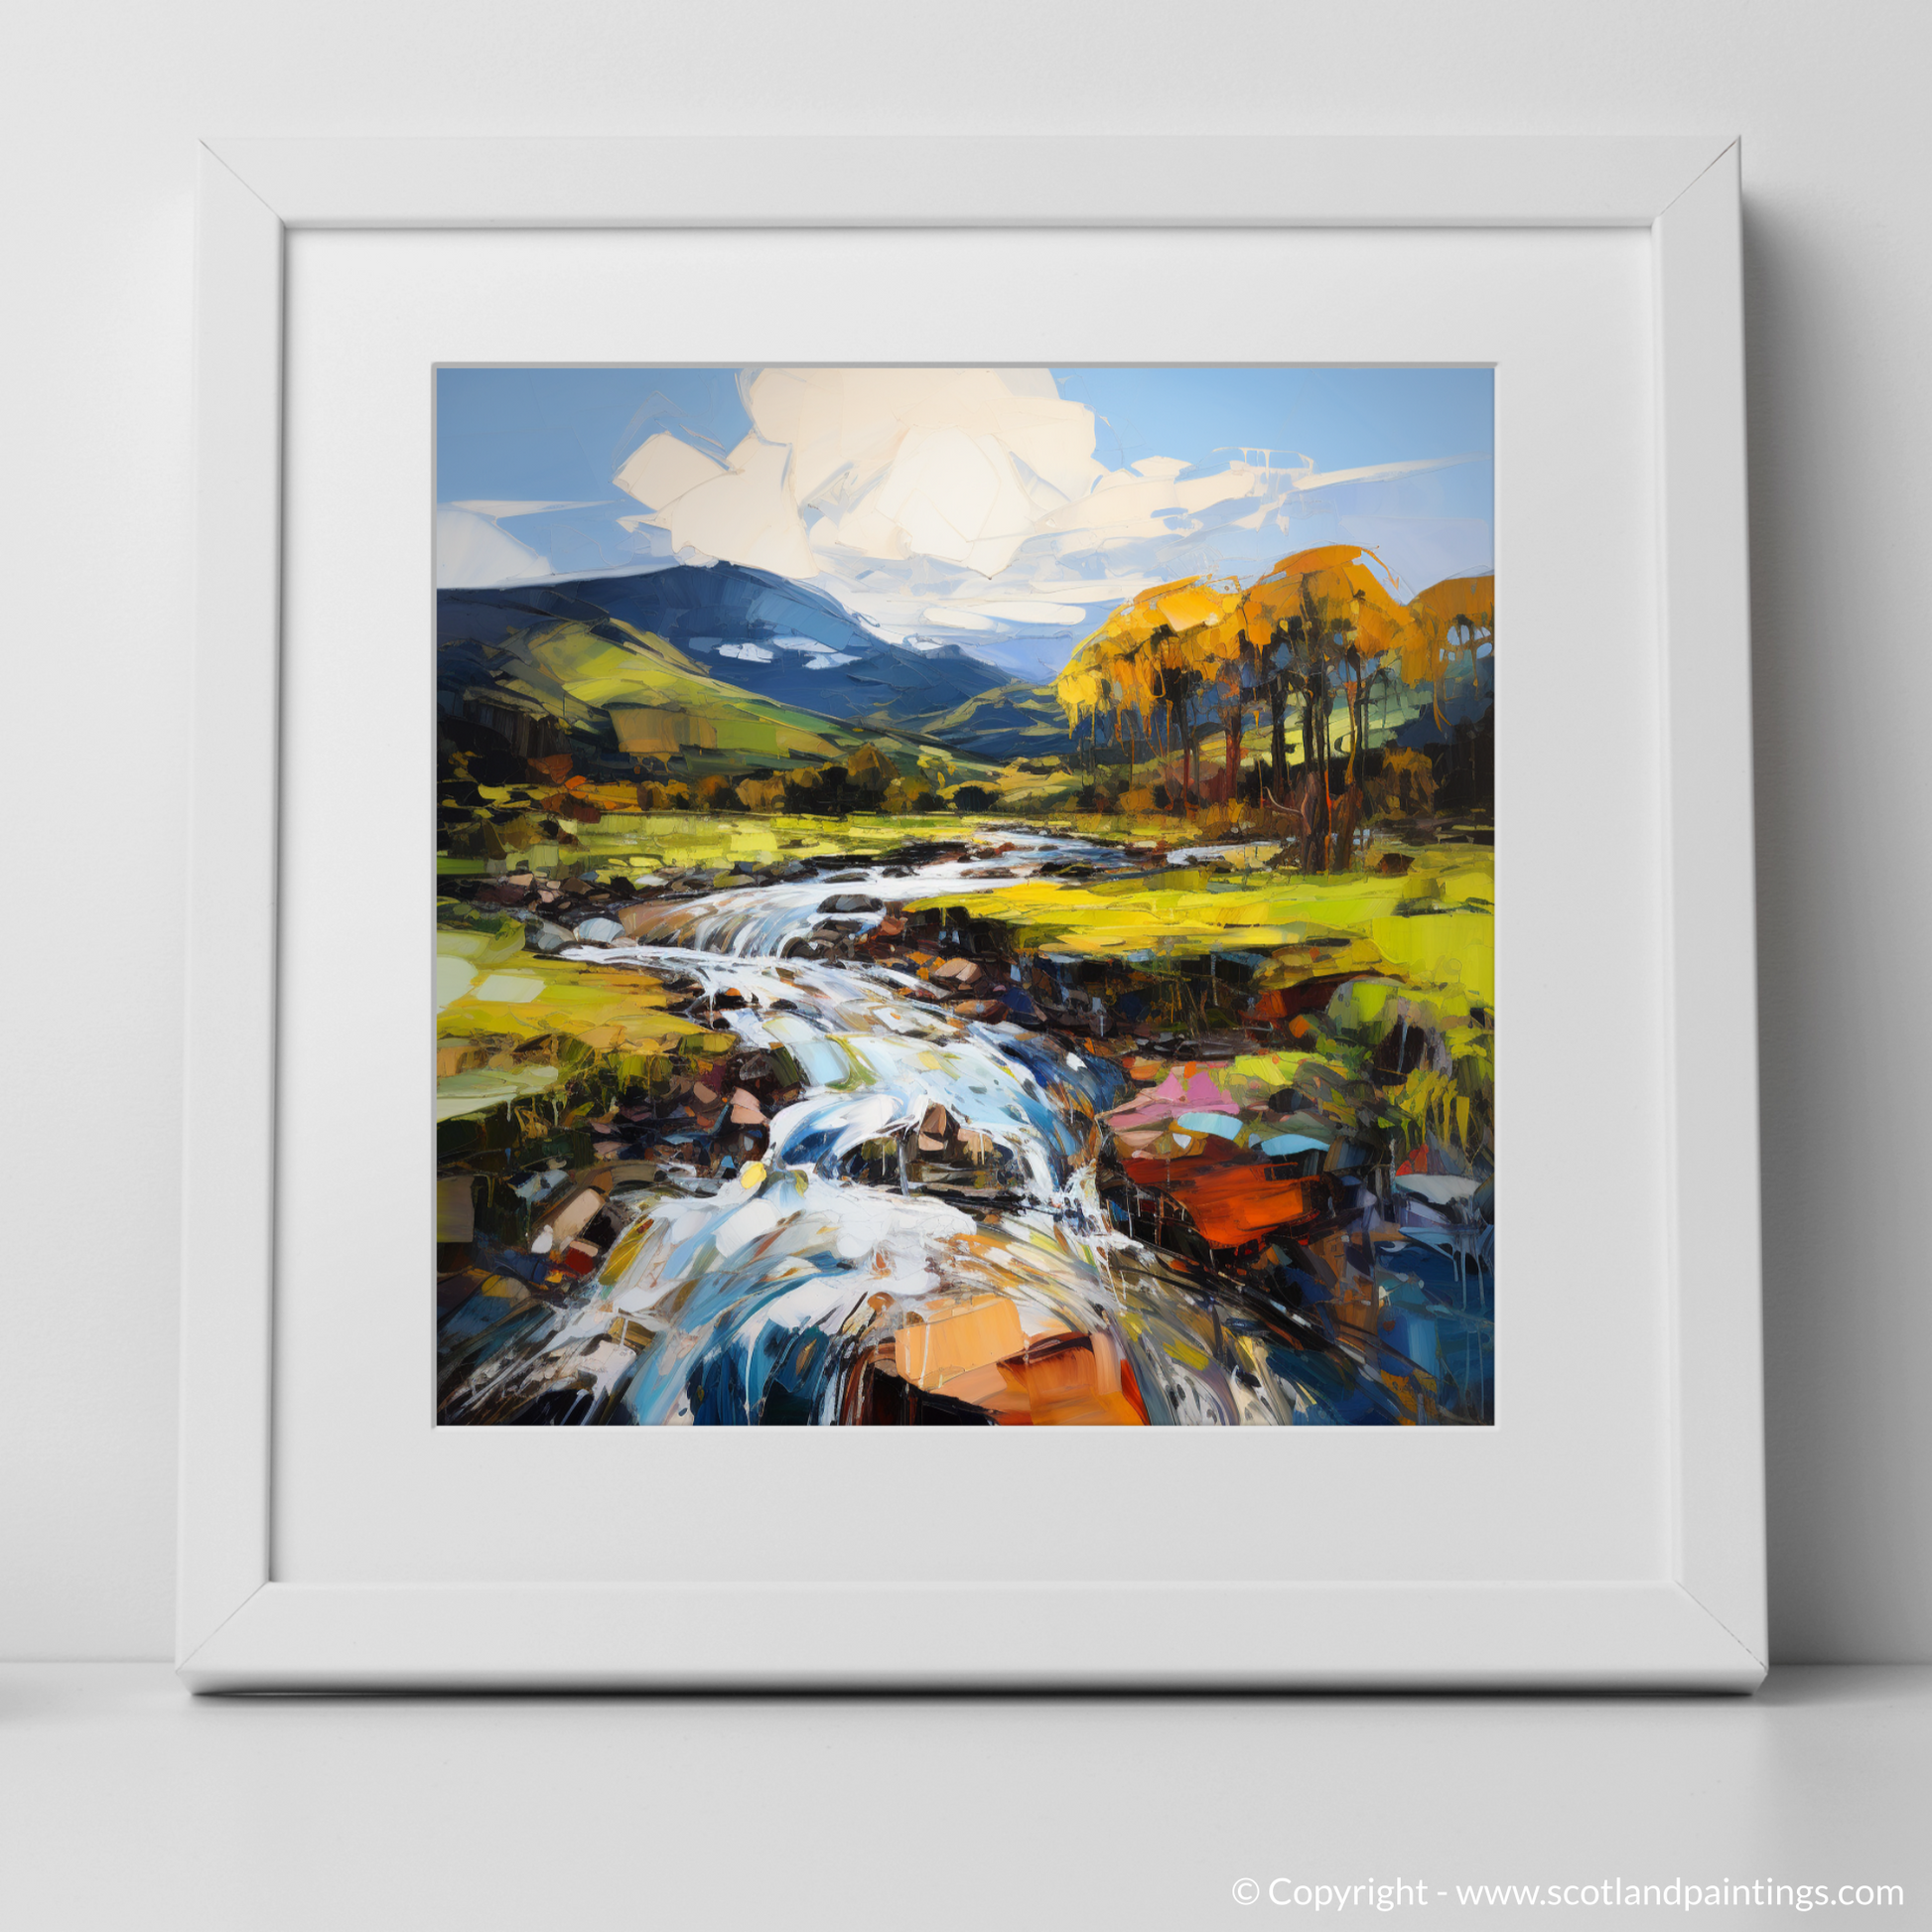 Art Print of River Carron, Ross-shire with a white frame